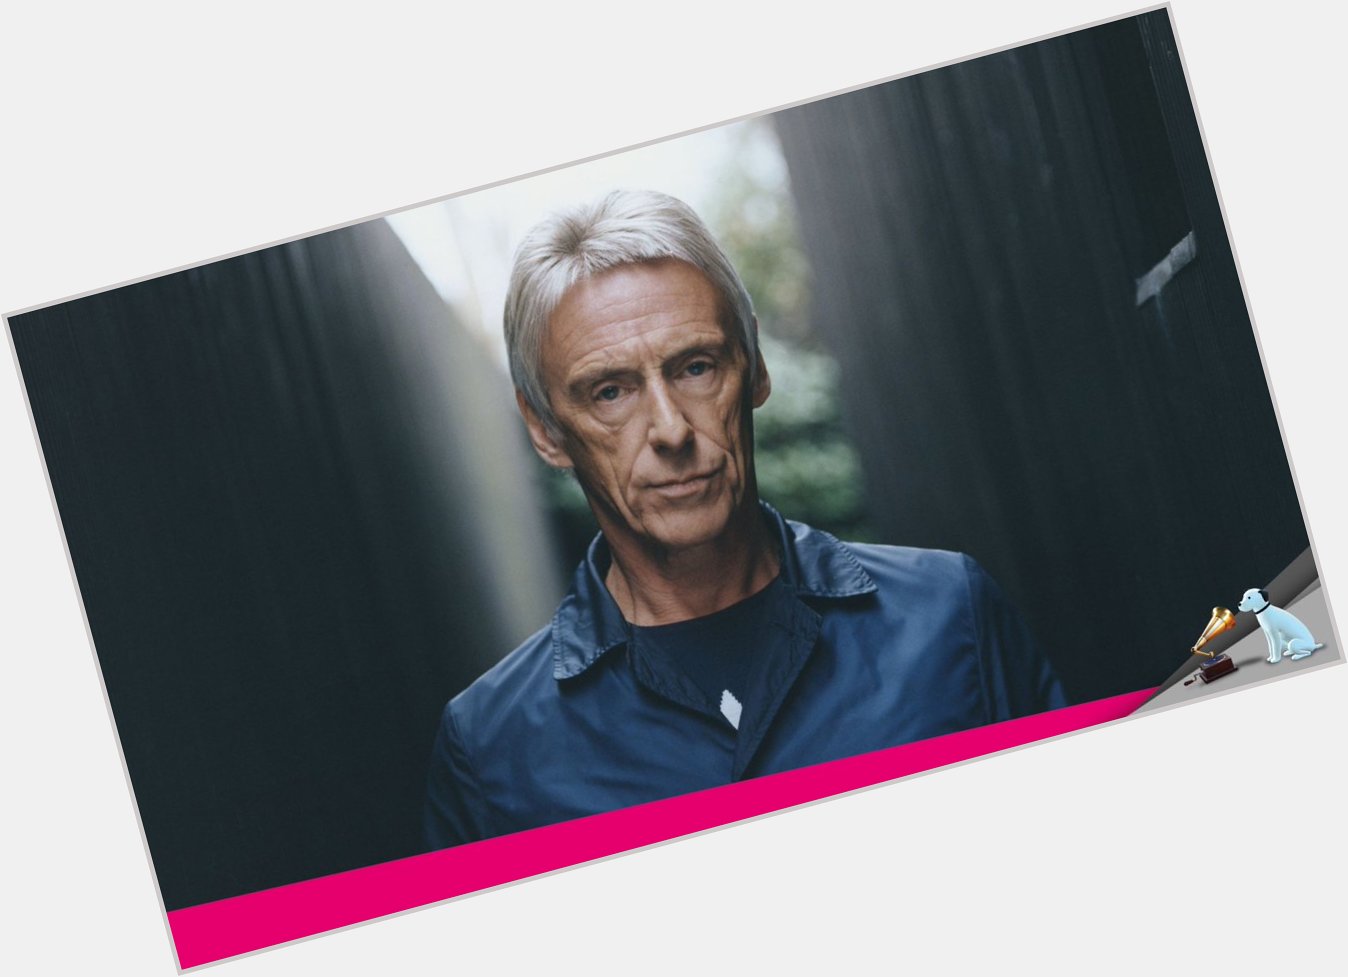  You can\t live a lie. You have to follow your heart. Happy 60th Birthday Paul Weller! 